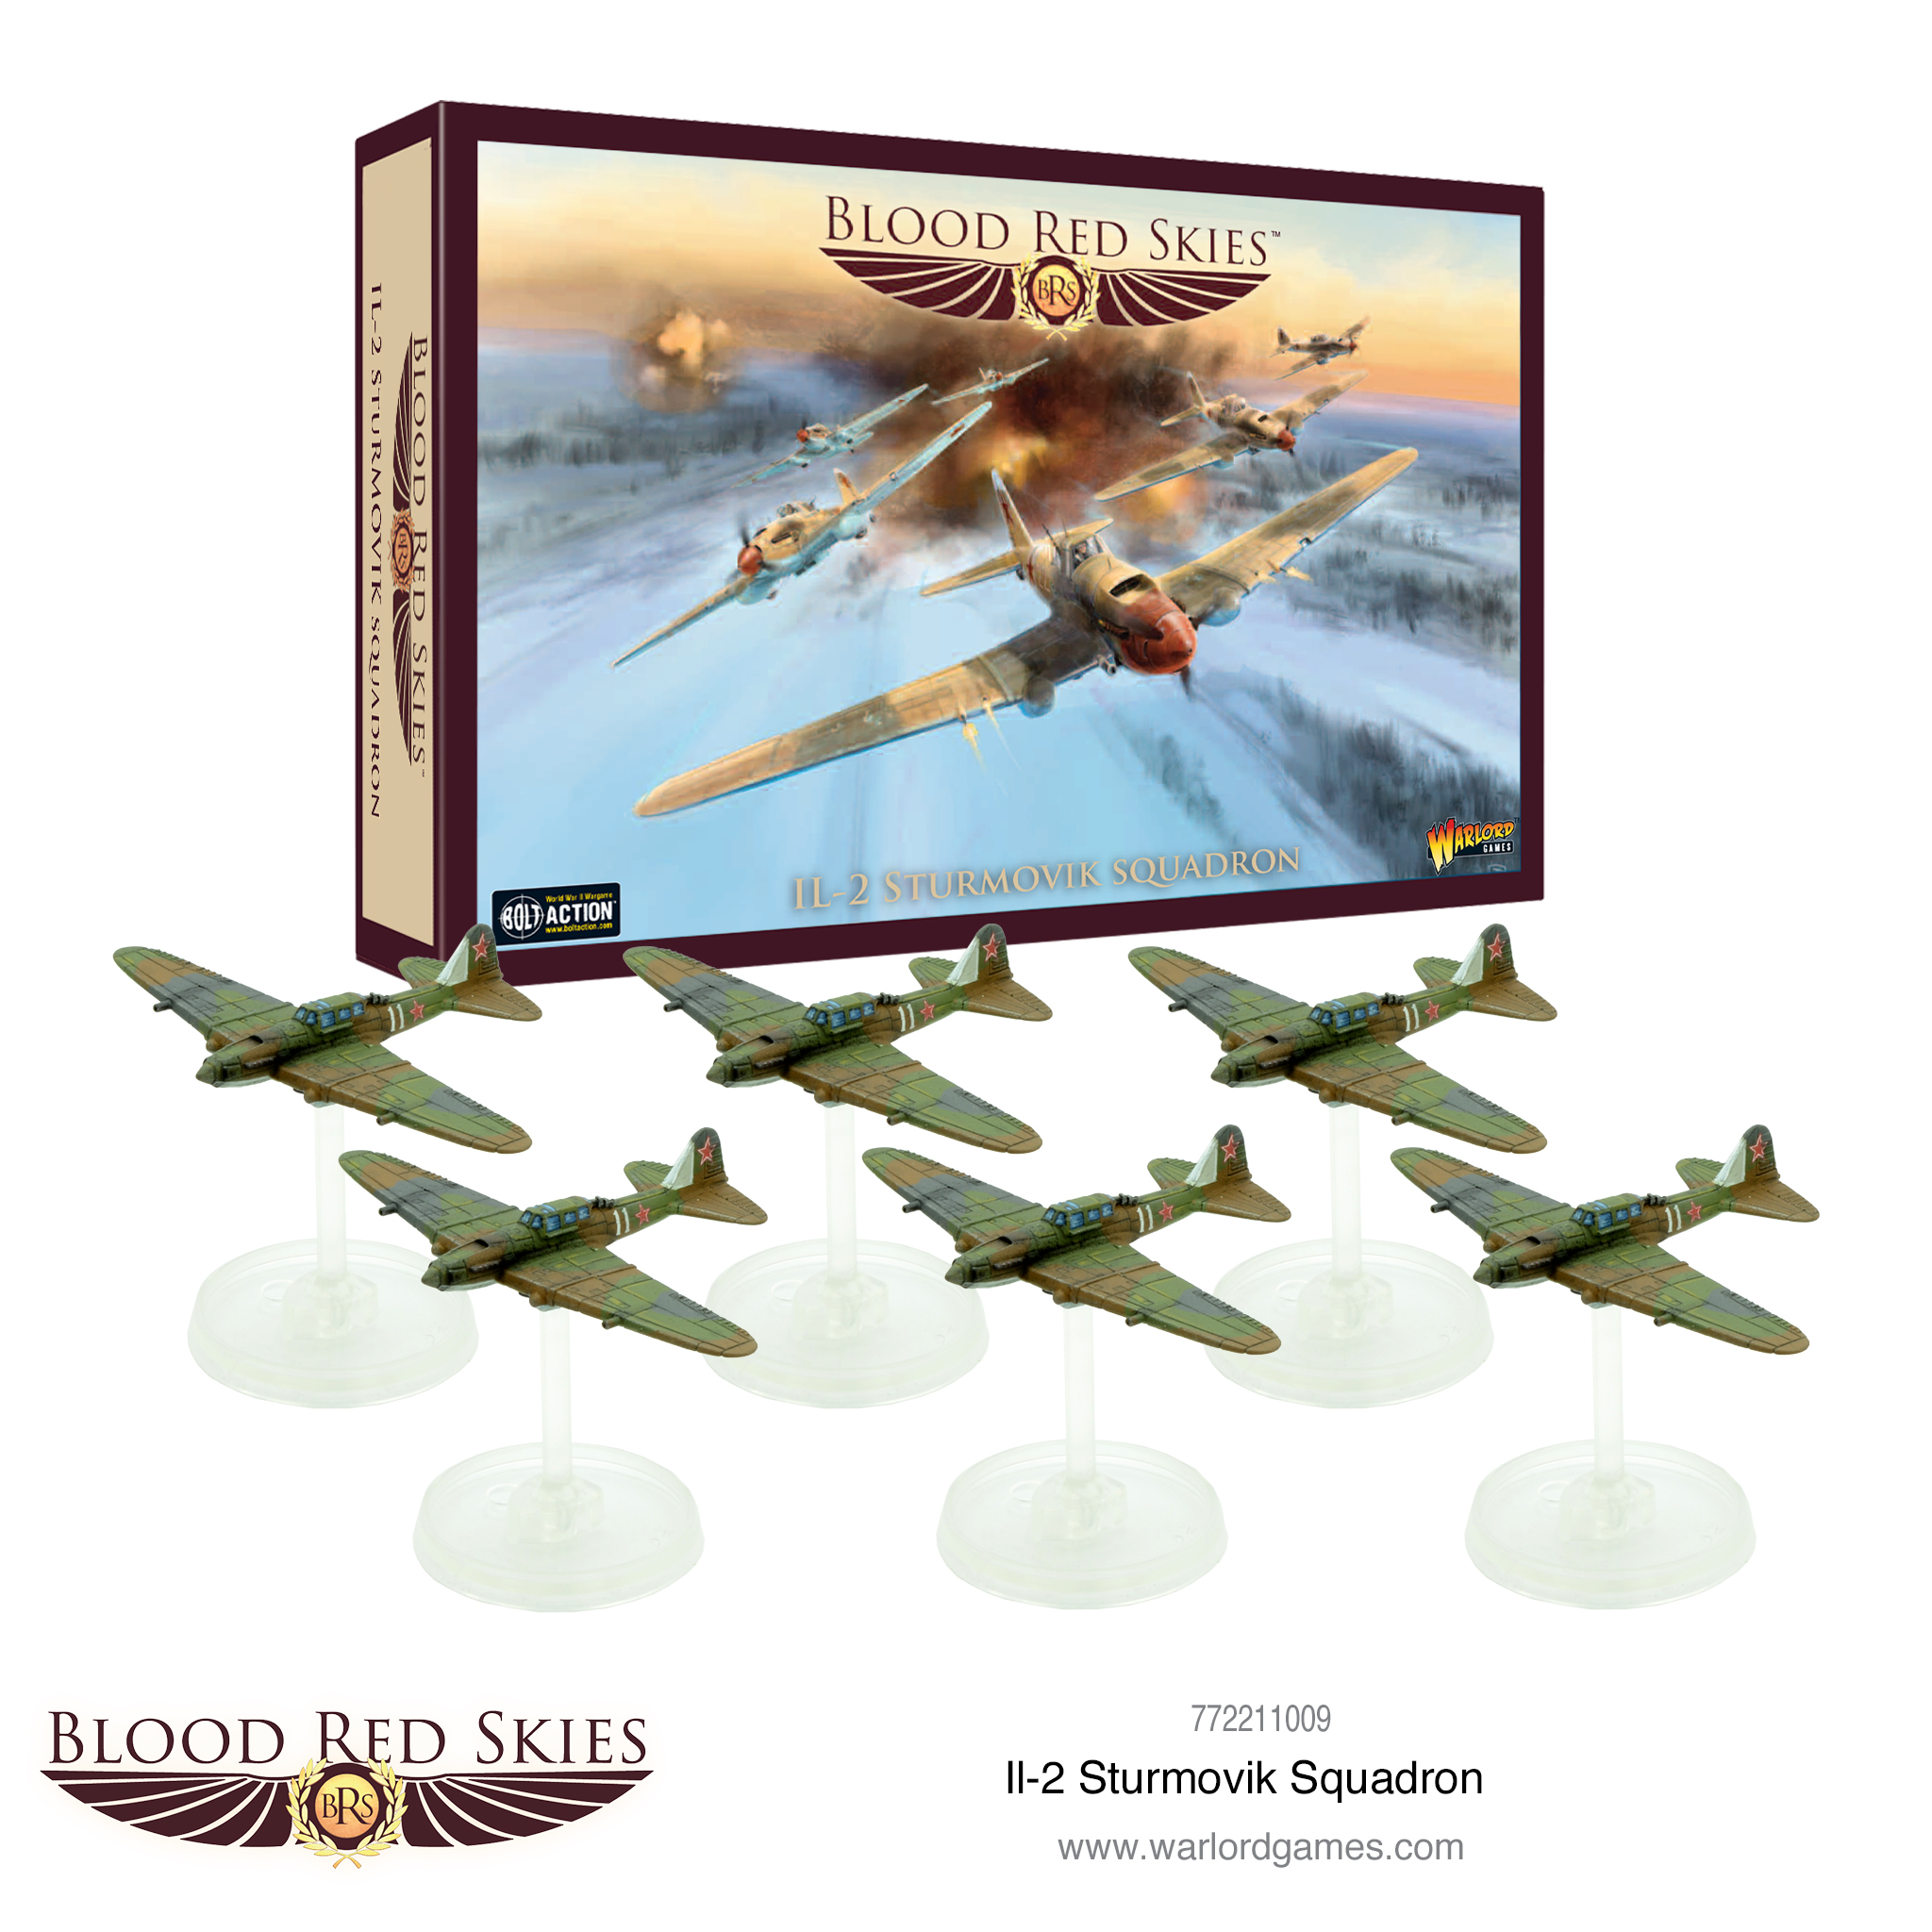 Blood Red Skies *Andy Chambers* Warlord Games Ivan Kozhedub Soviet Ace Pilot 